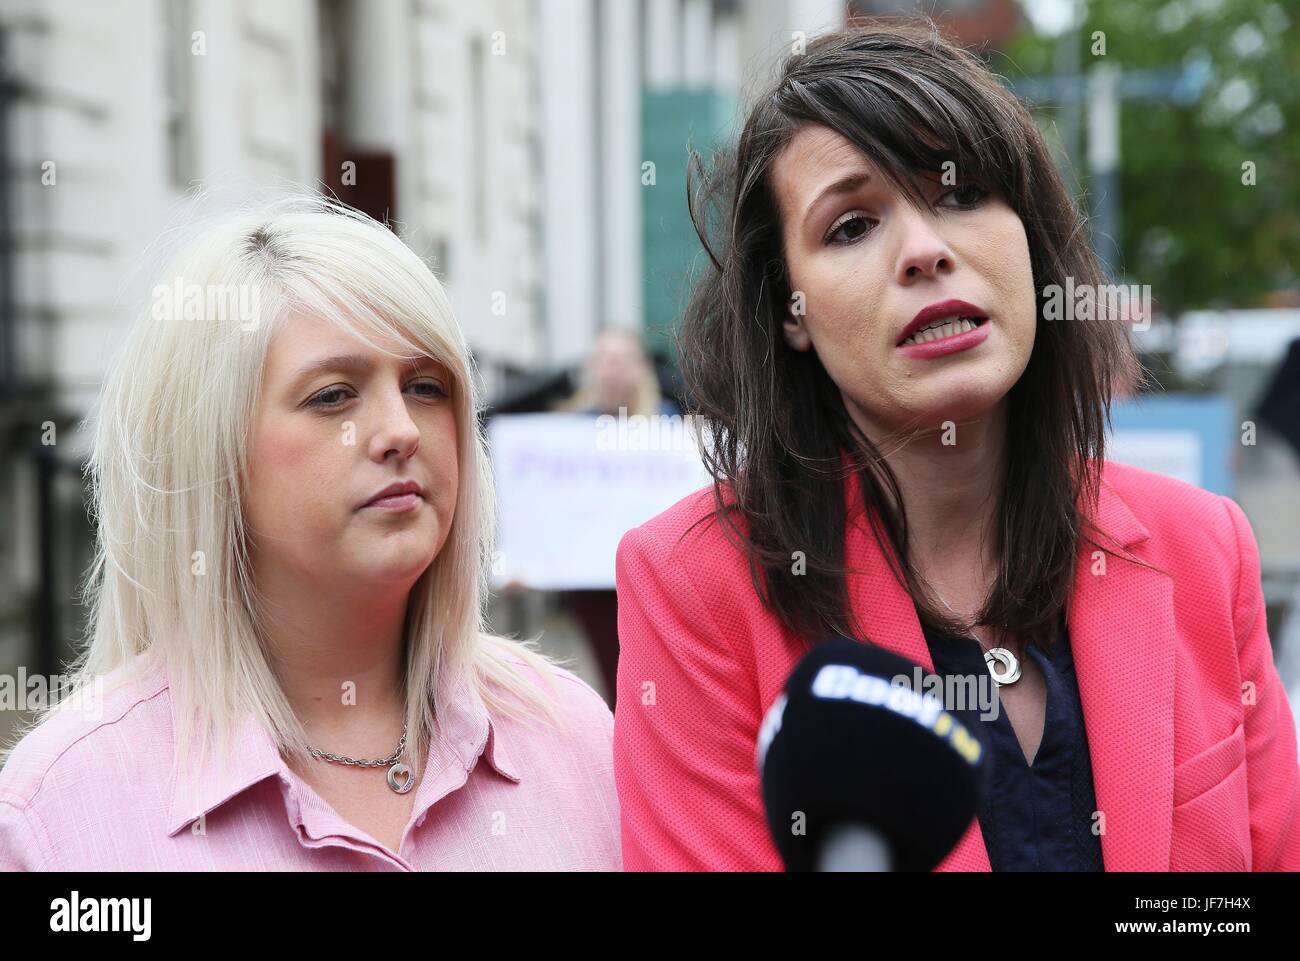 Pro-choice campaigner Sarah Ewart (left), who had to travel to England for an abortion due to fatal foetal abnormality, and Grainne Teggart of Amnesty International, speak to media outside the Royal Courts of Justice, Belfast, where the Court of Appeal allowed an appeal against a lower court's ruling that abortion legislation was incompatible with the UK's Human Rights Act. Stock Photo